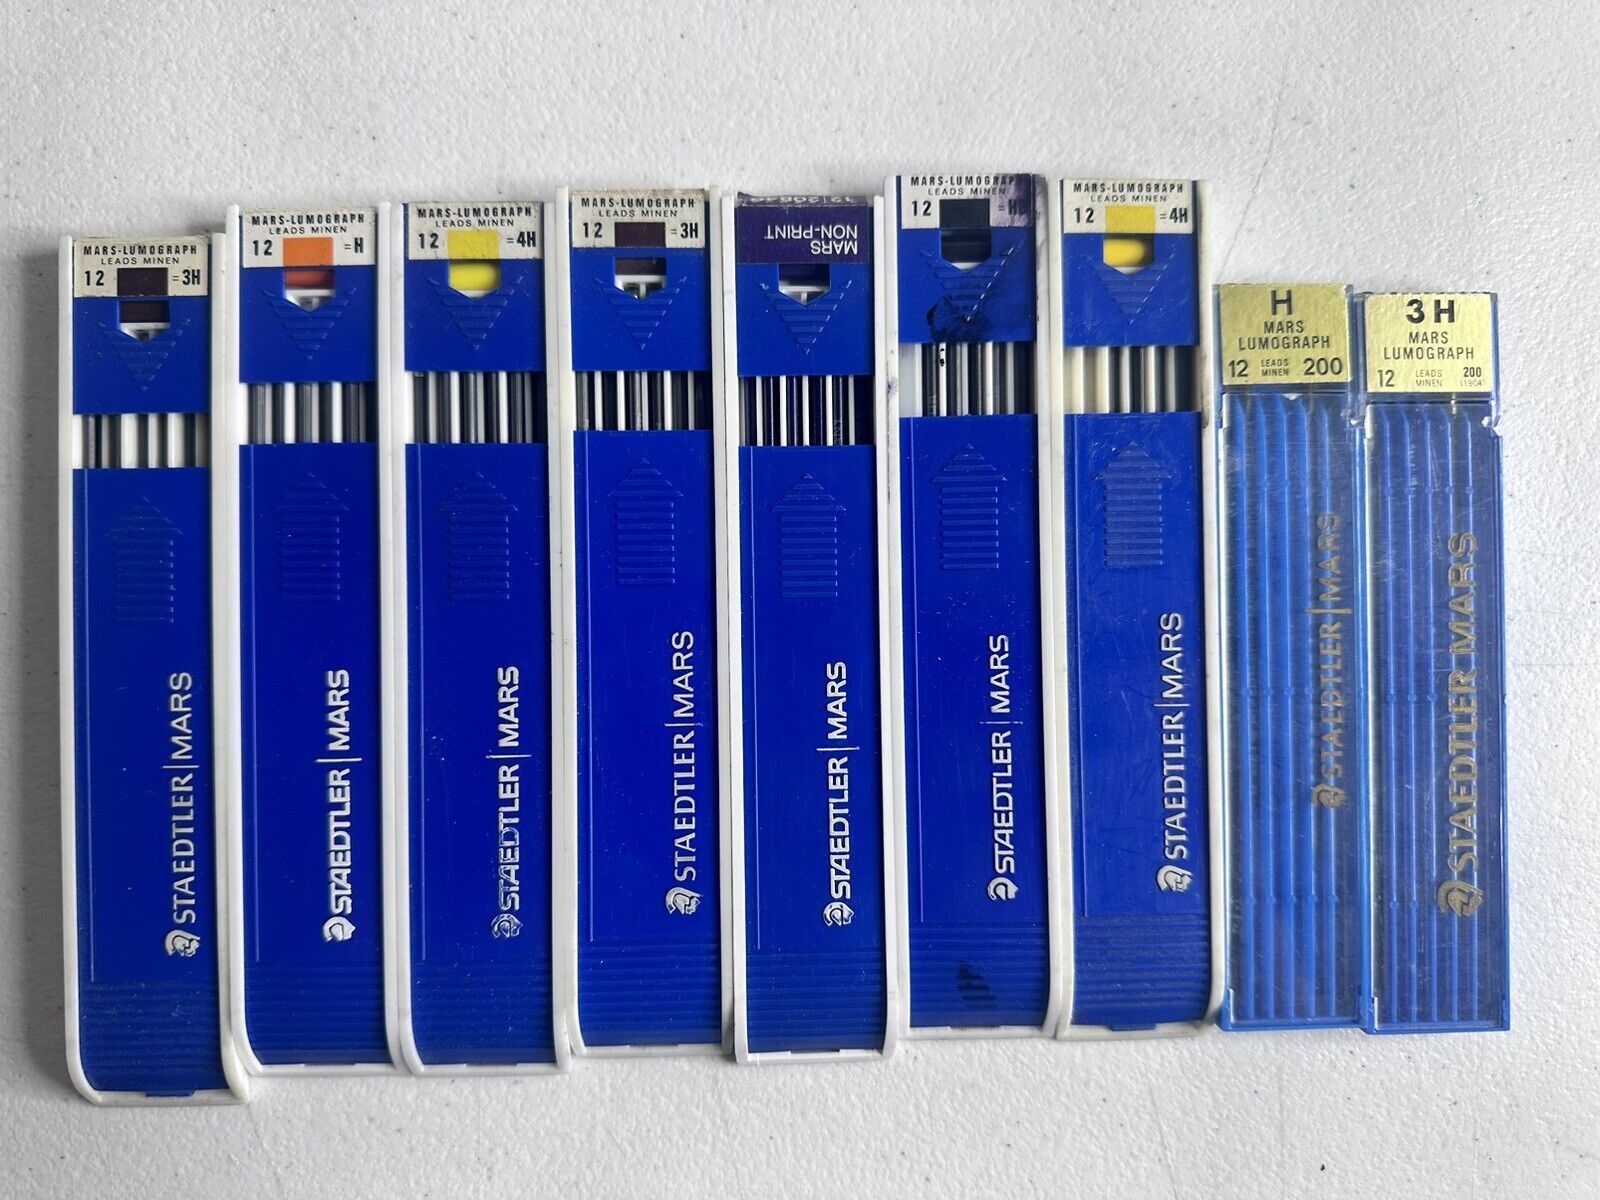 Vintage Staedtler Mars Technico Color-Code Leads for Architects & Hobbyists